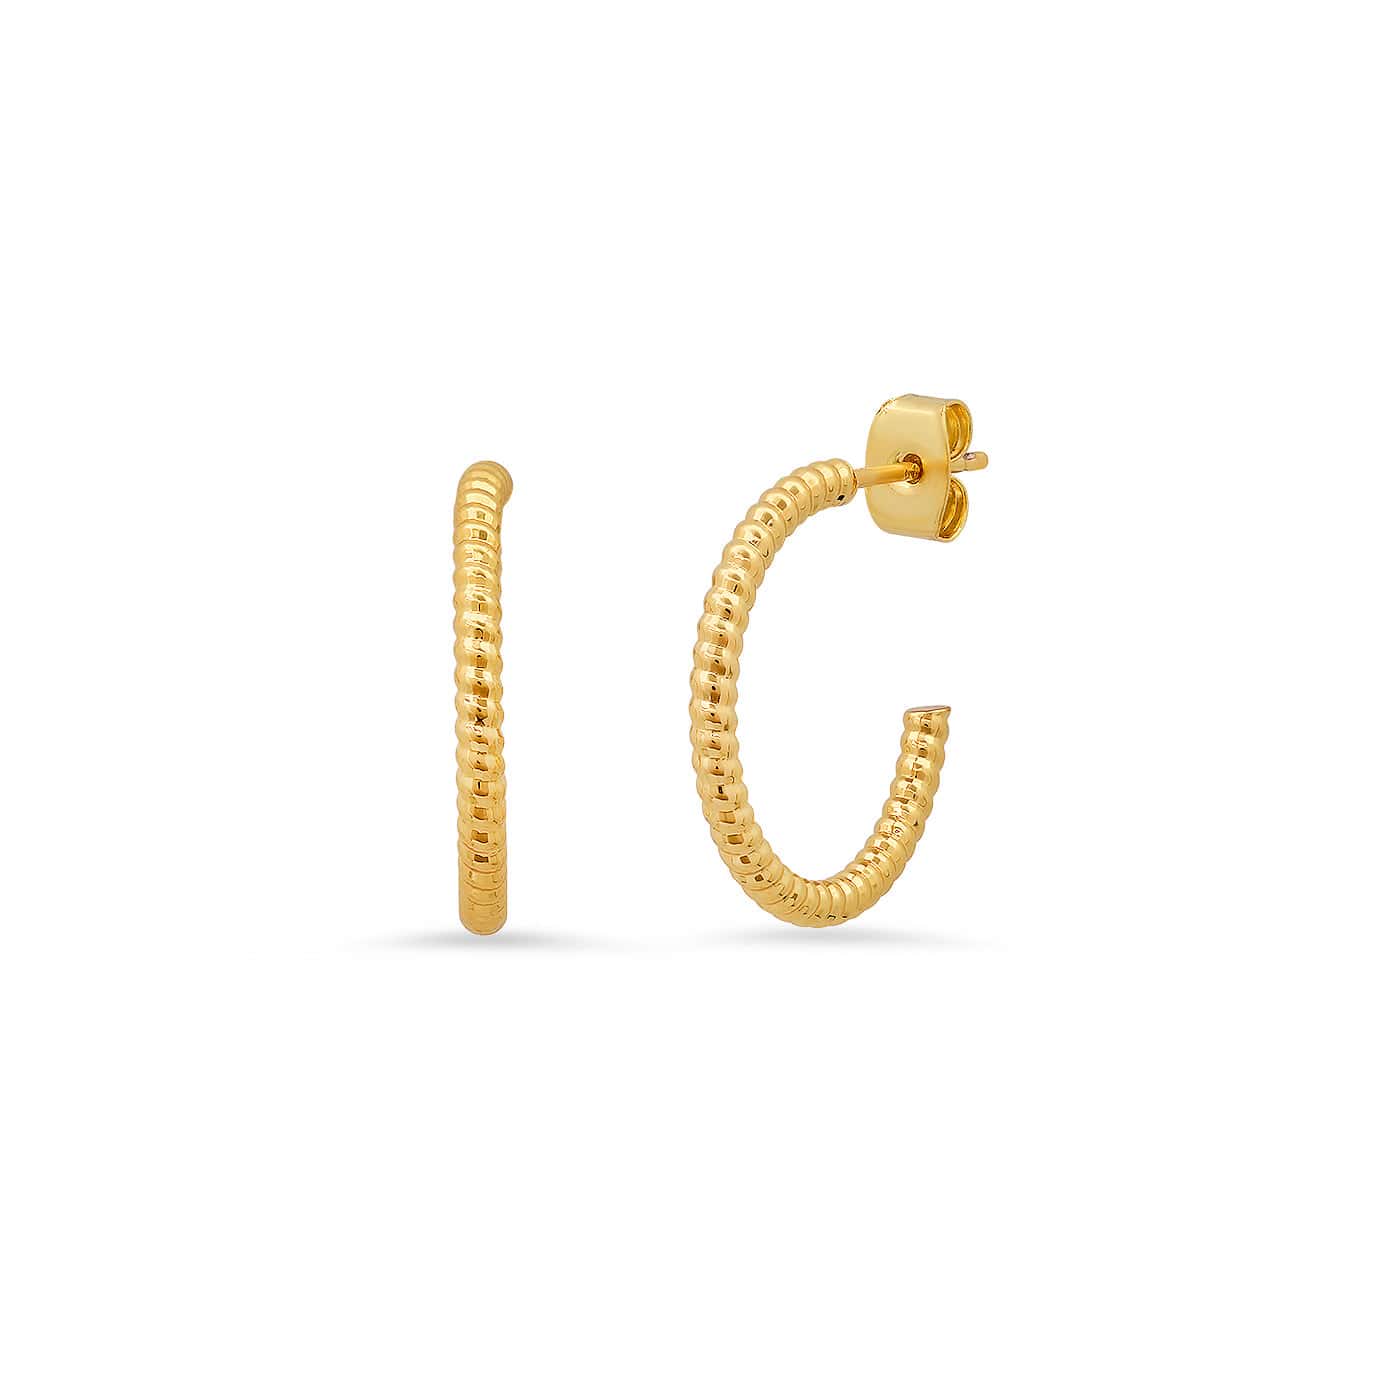 TAI JEWELRY Earrings Twisted Small Gold Hoops